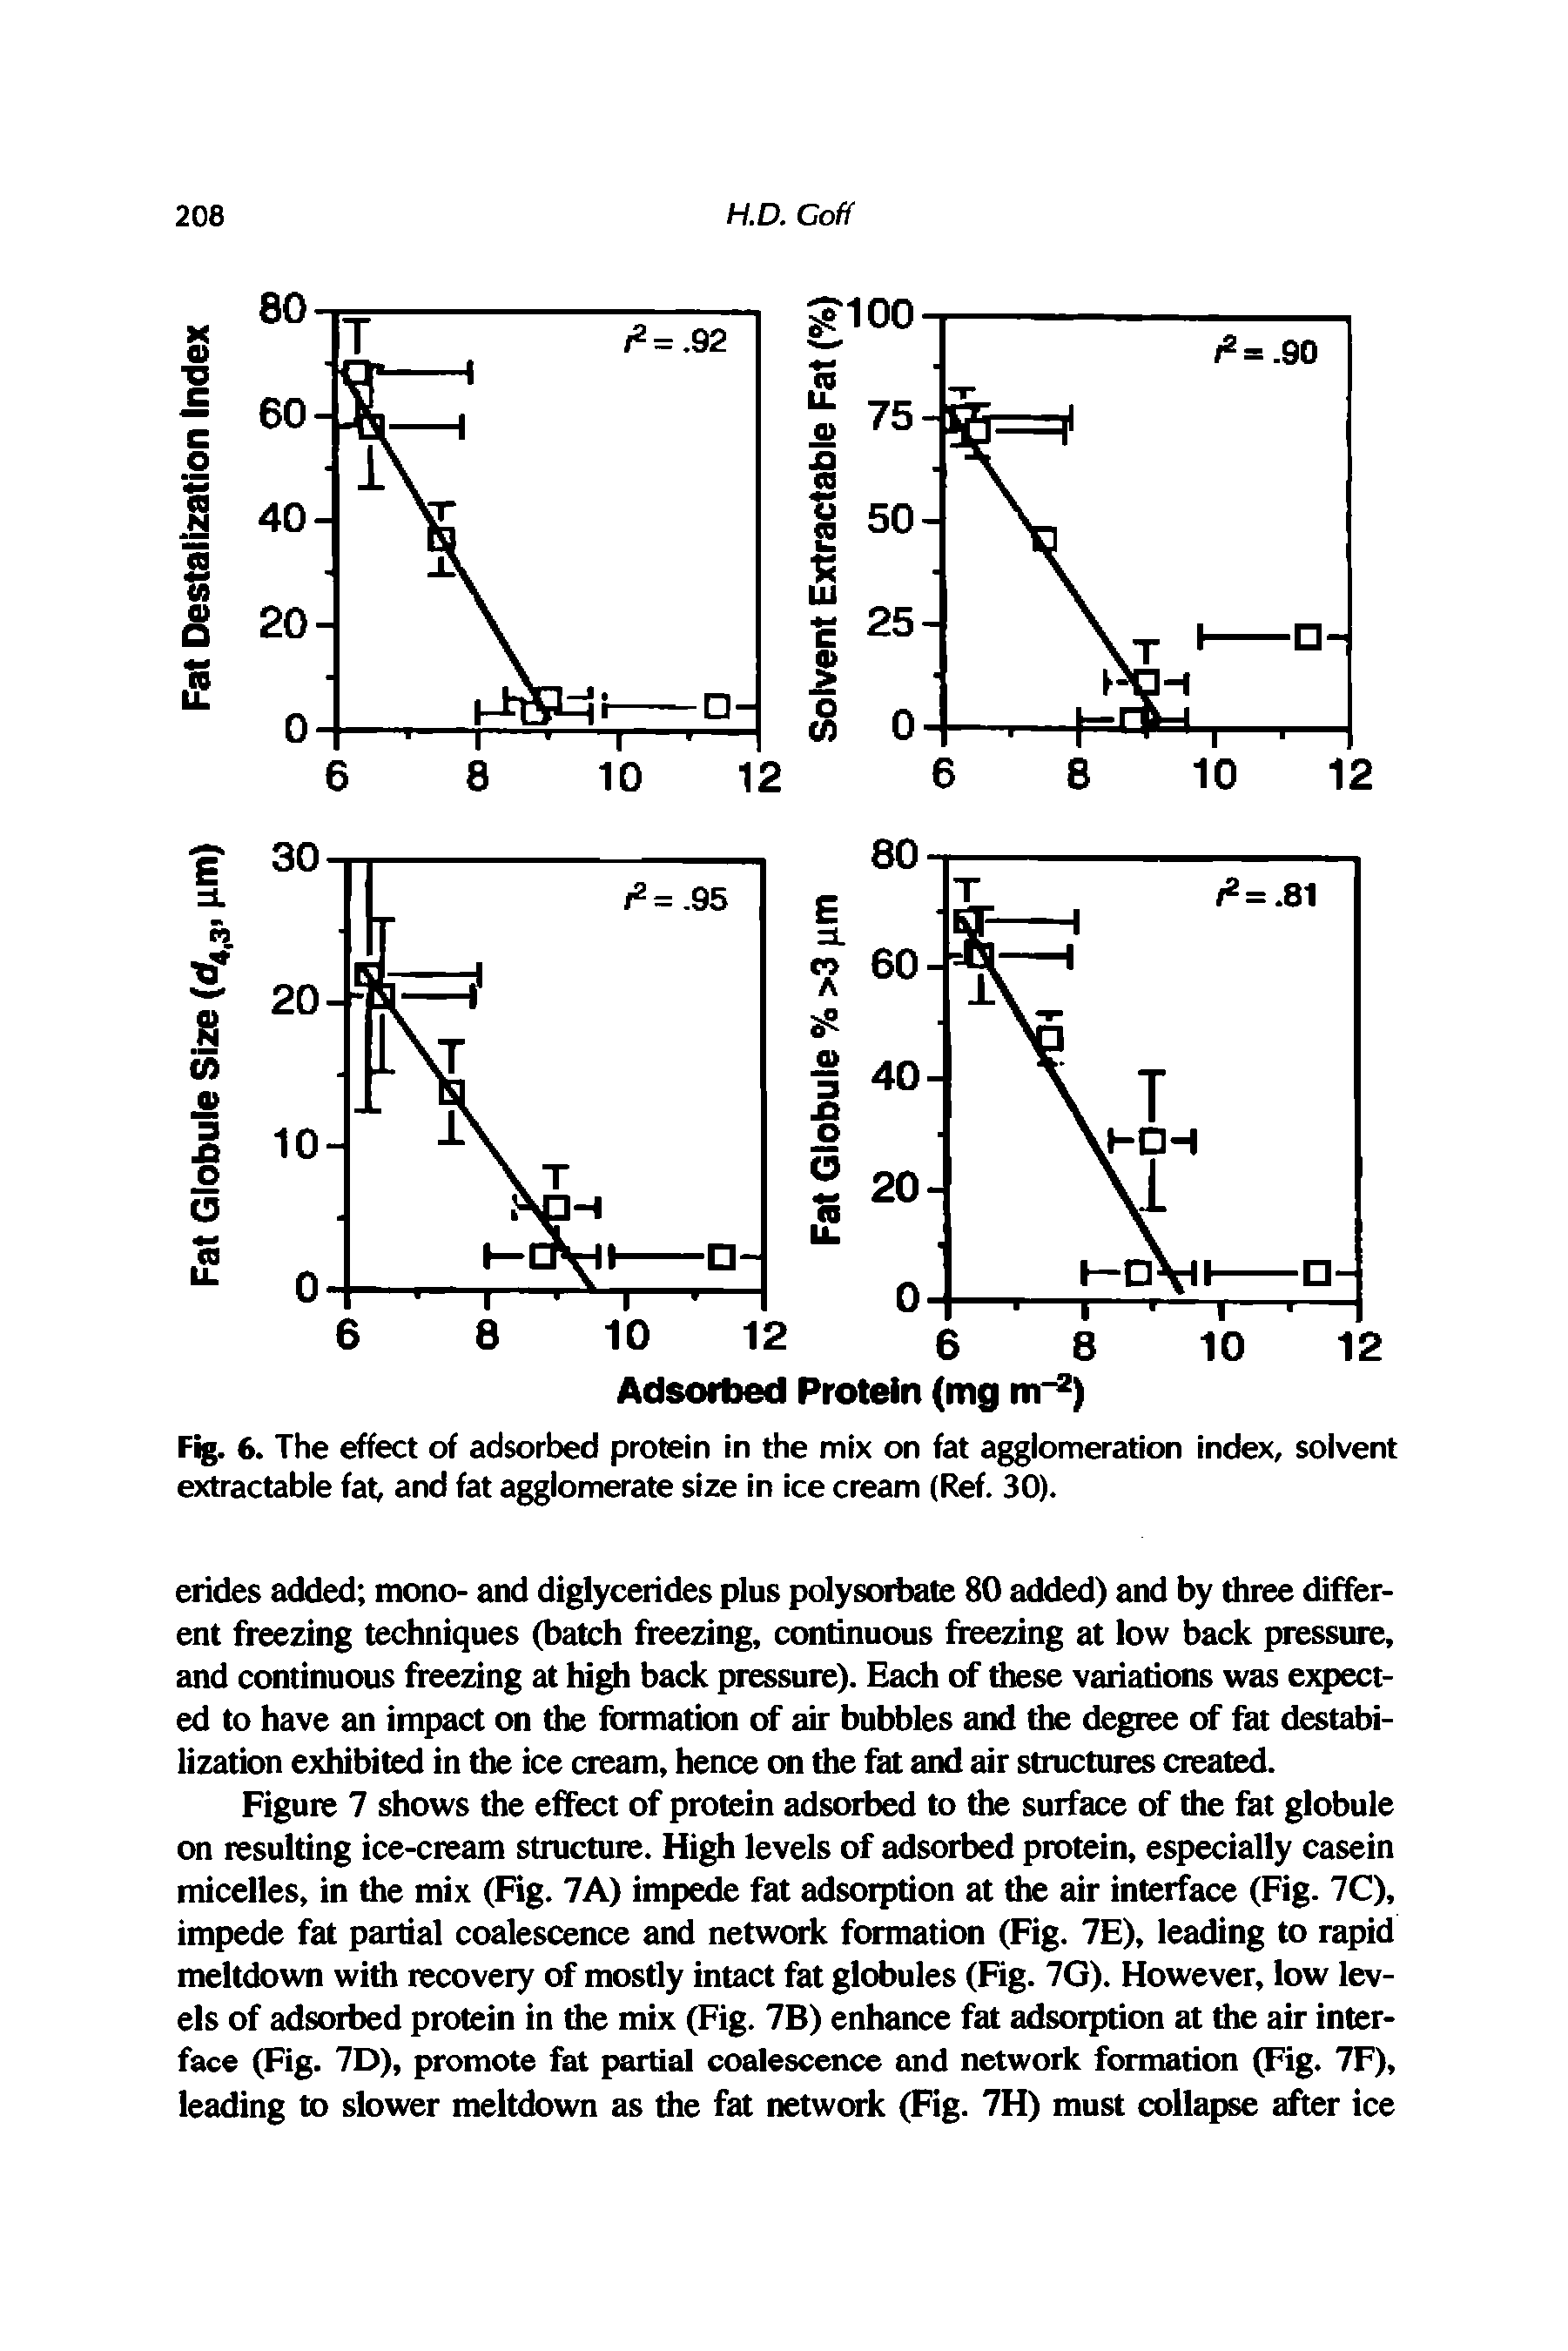 Fig. 6. The effect of adsorbed protein in the mix on fat agglomeration index, solvent extractable fat and fat agglomerate size in ice cream (Ref. 30).